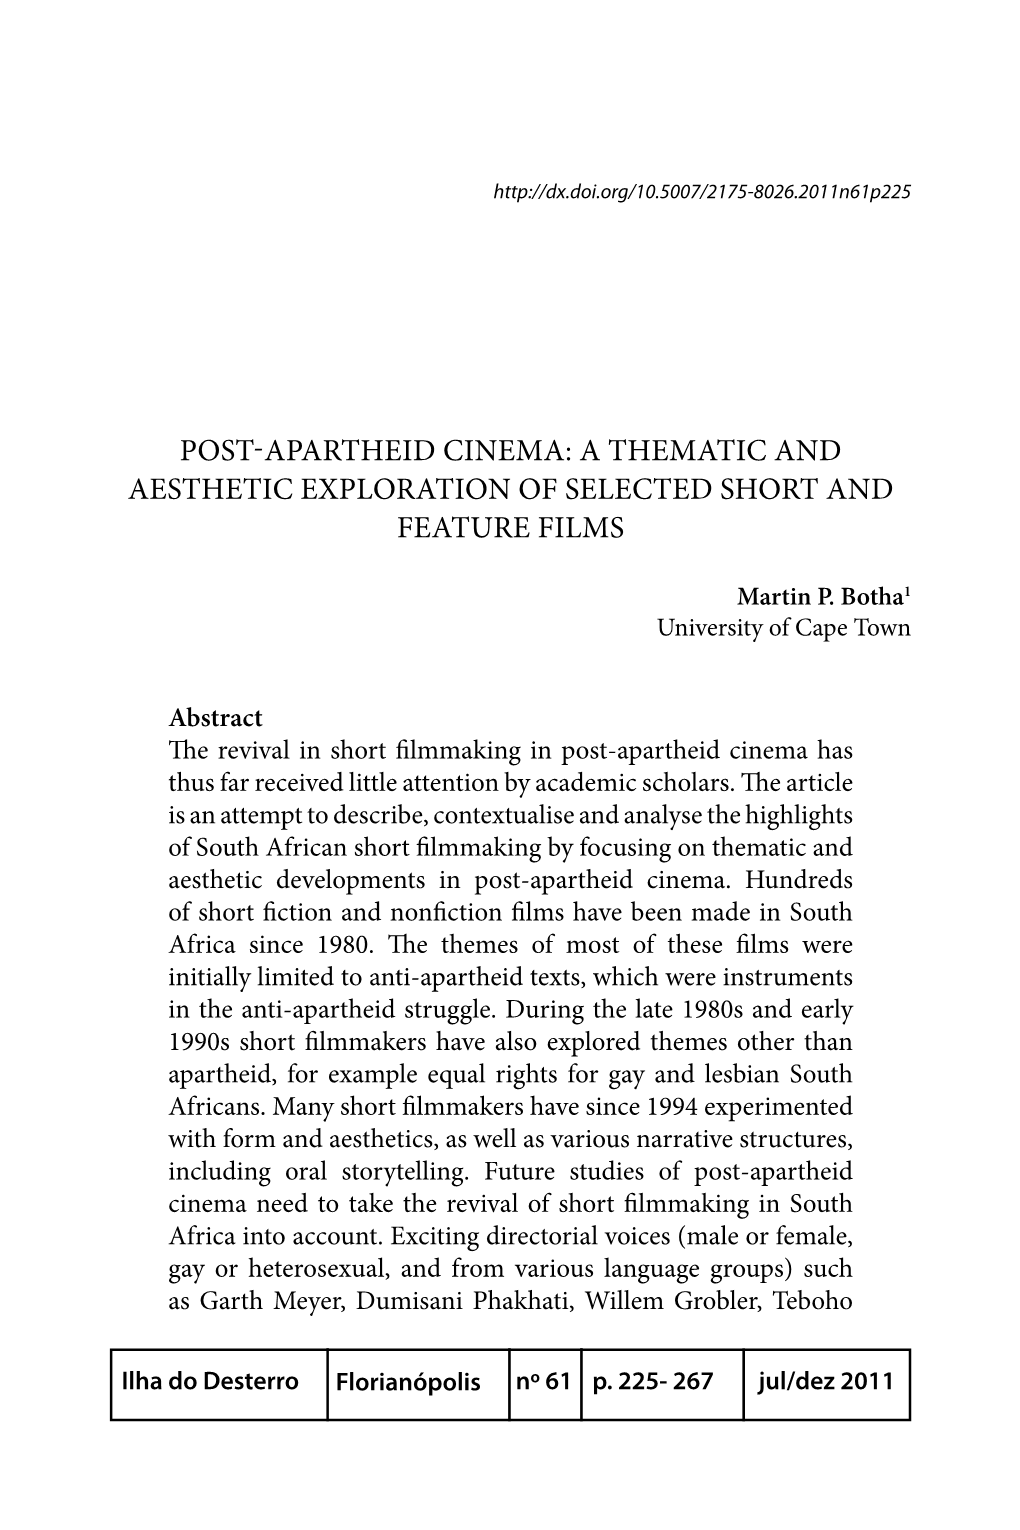 Post-Apartheid Cinema: a Thematic and Aesthetic Exploration of Selected Short and Feature Films